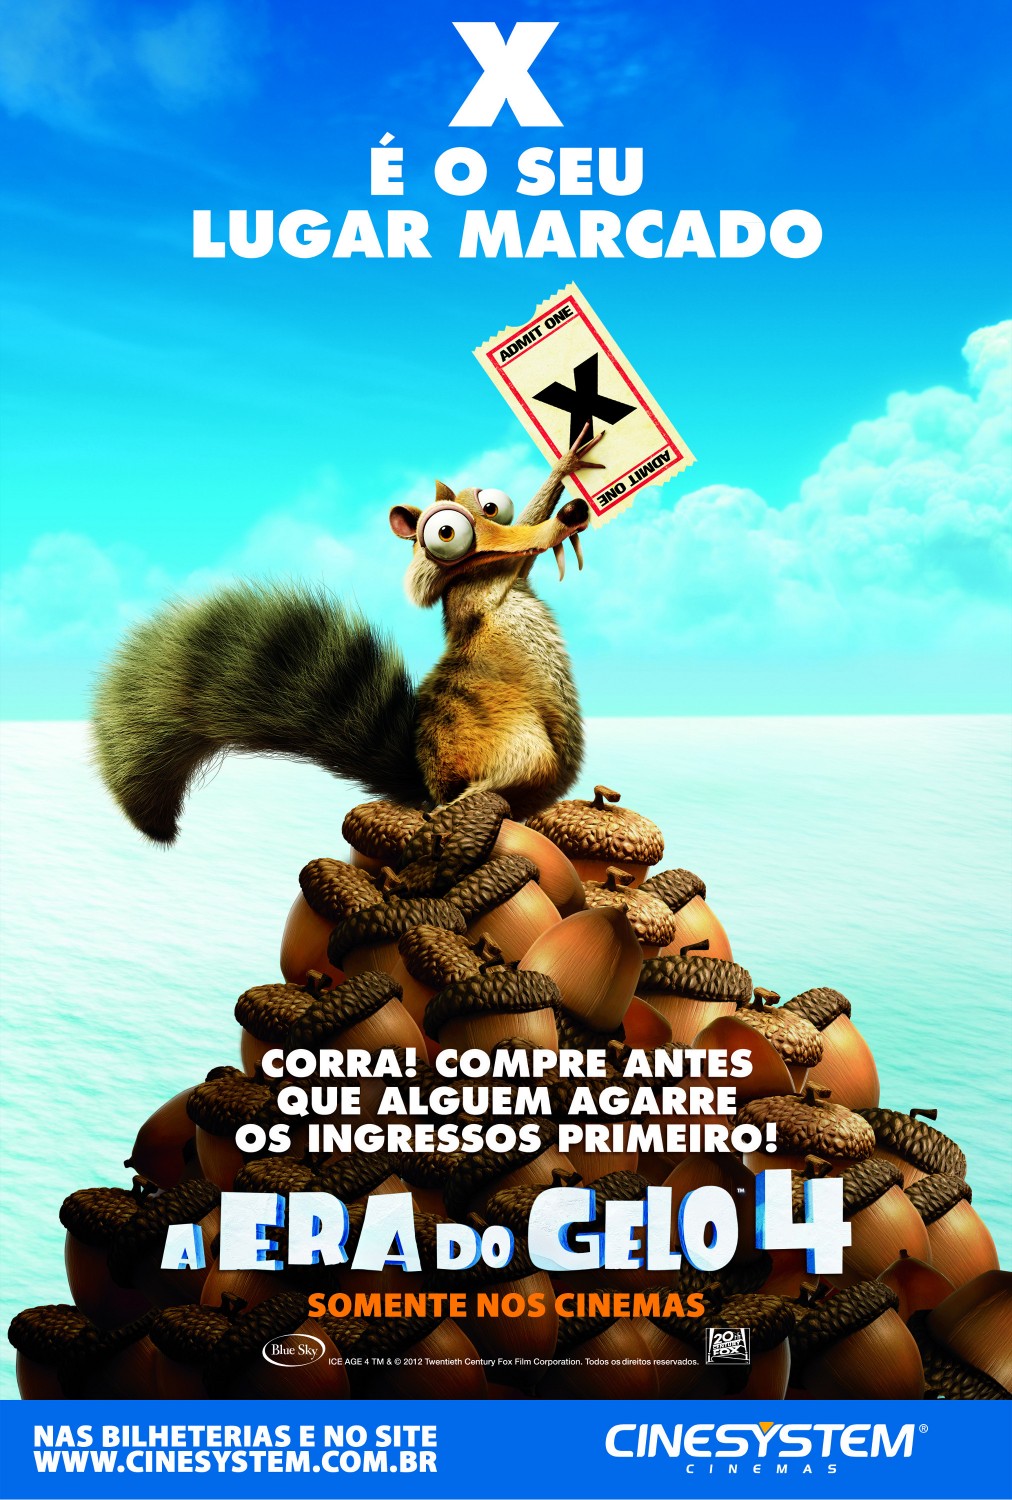 Extra Large Movie Poster Image for Ice Age: Continental Drift (#13 of 13)